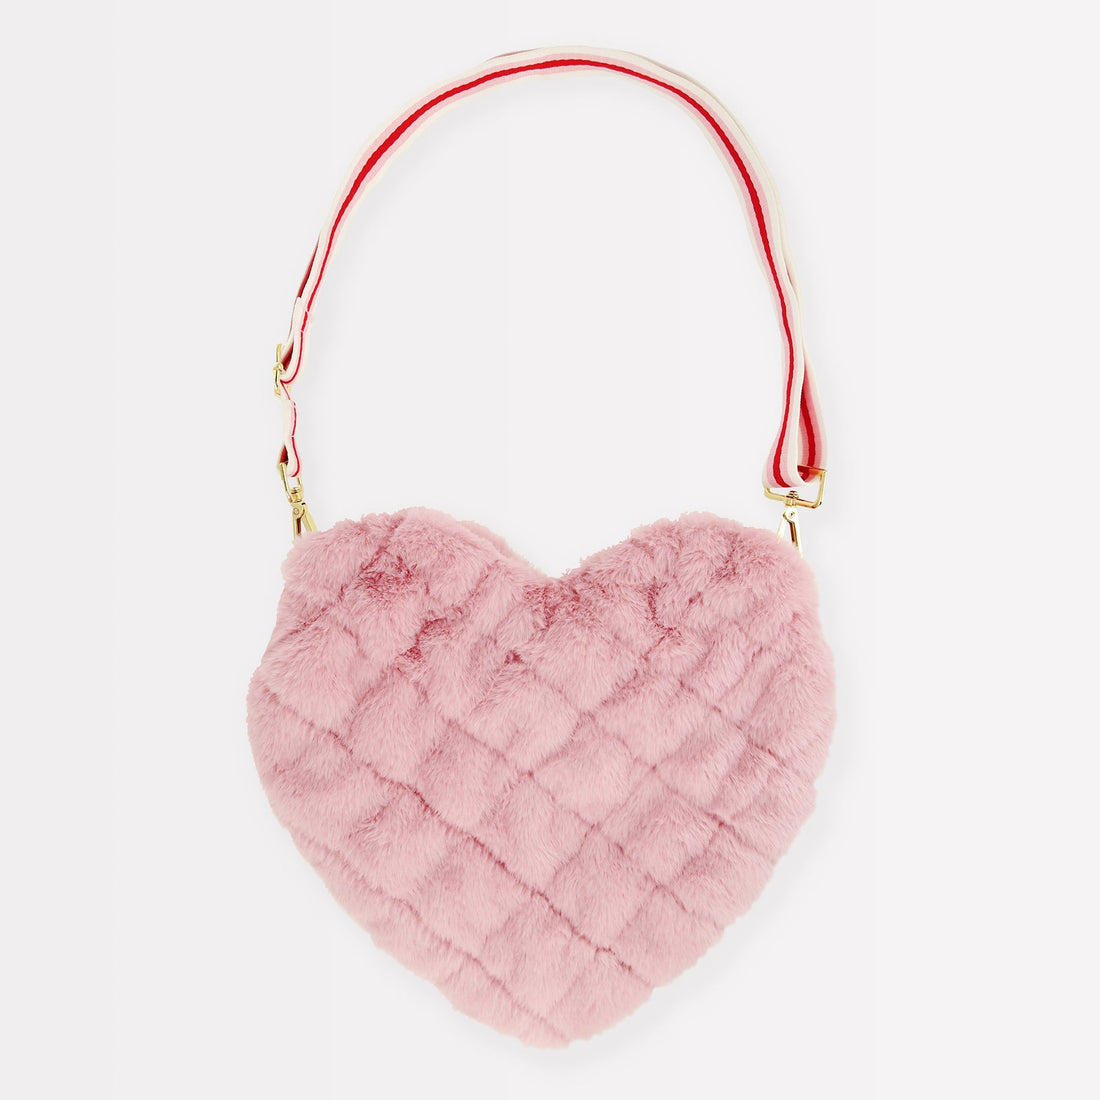 A pink Meri Meri plush heart-shaped bag with a red strap.